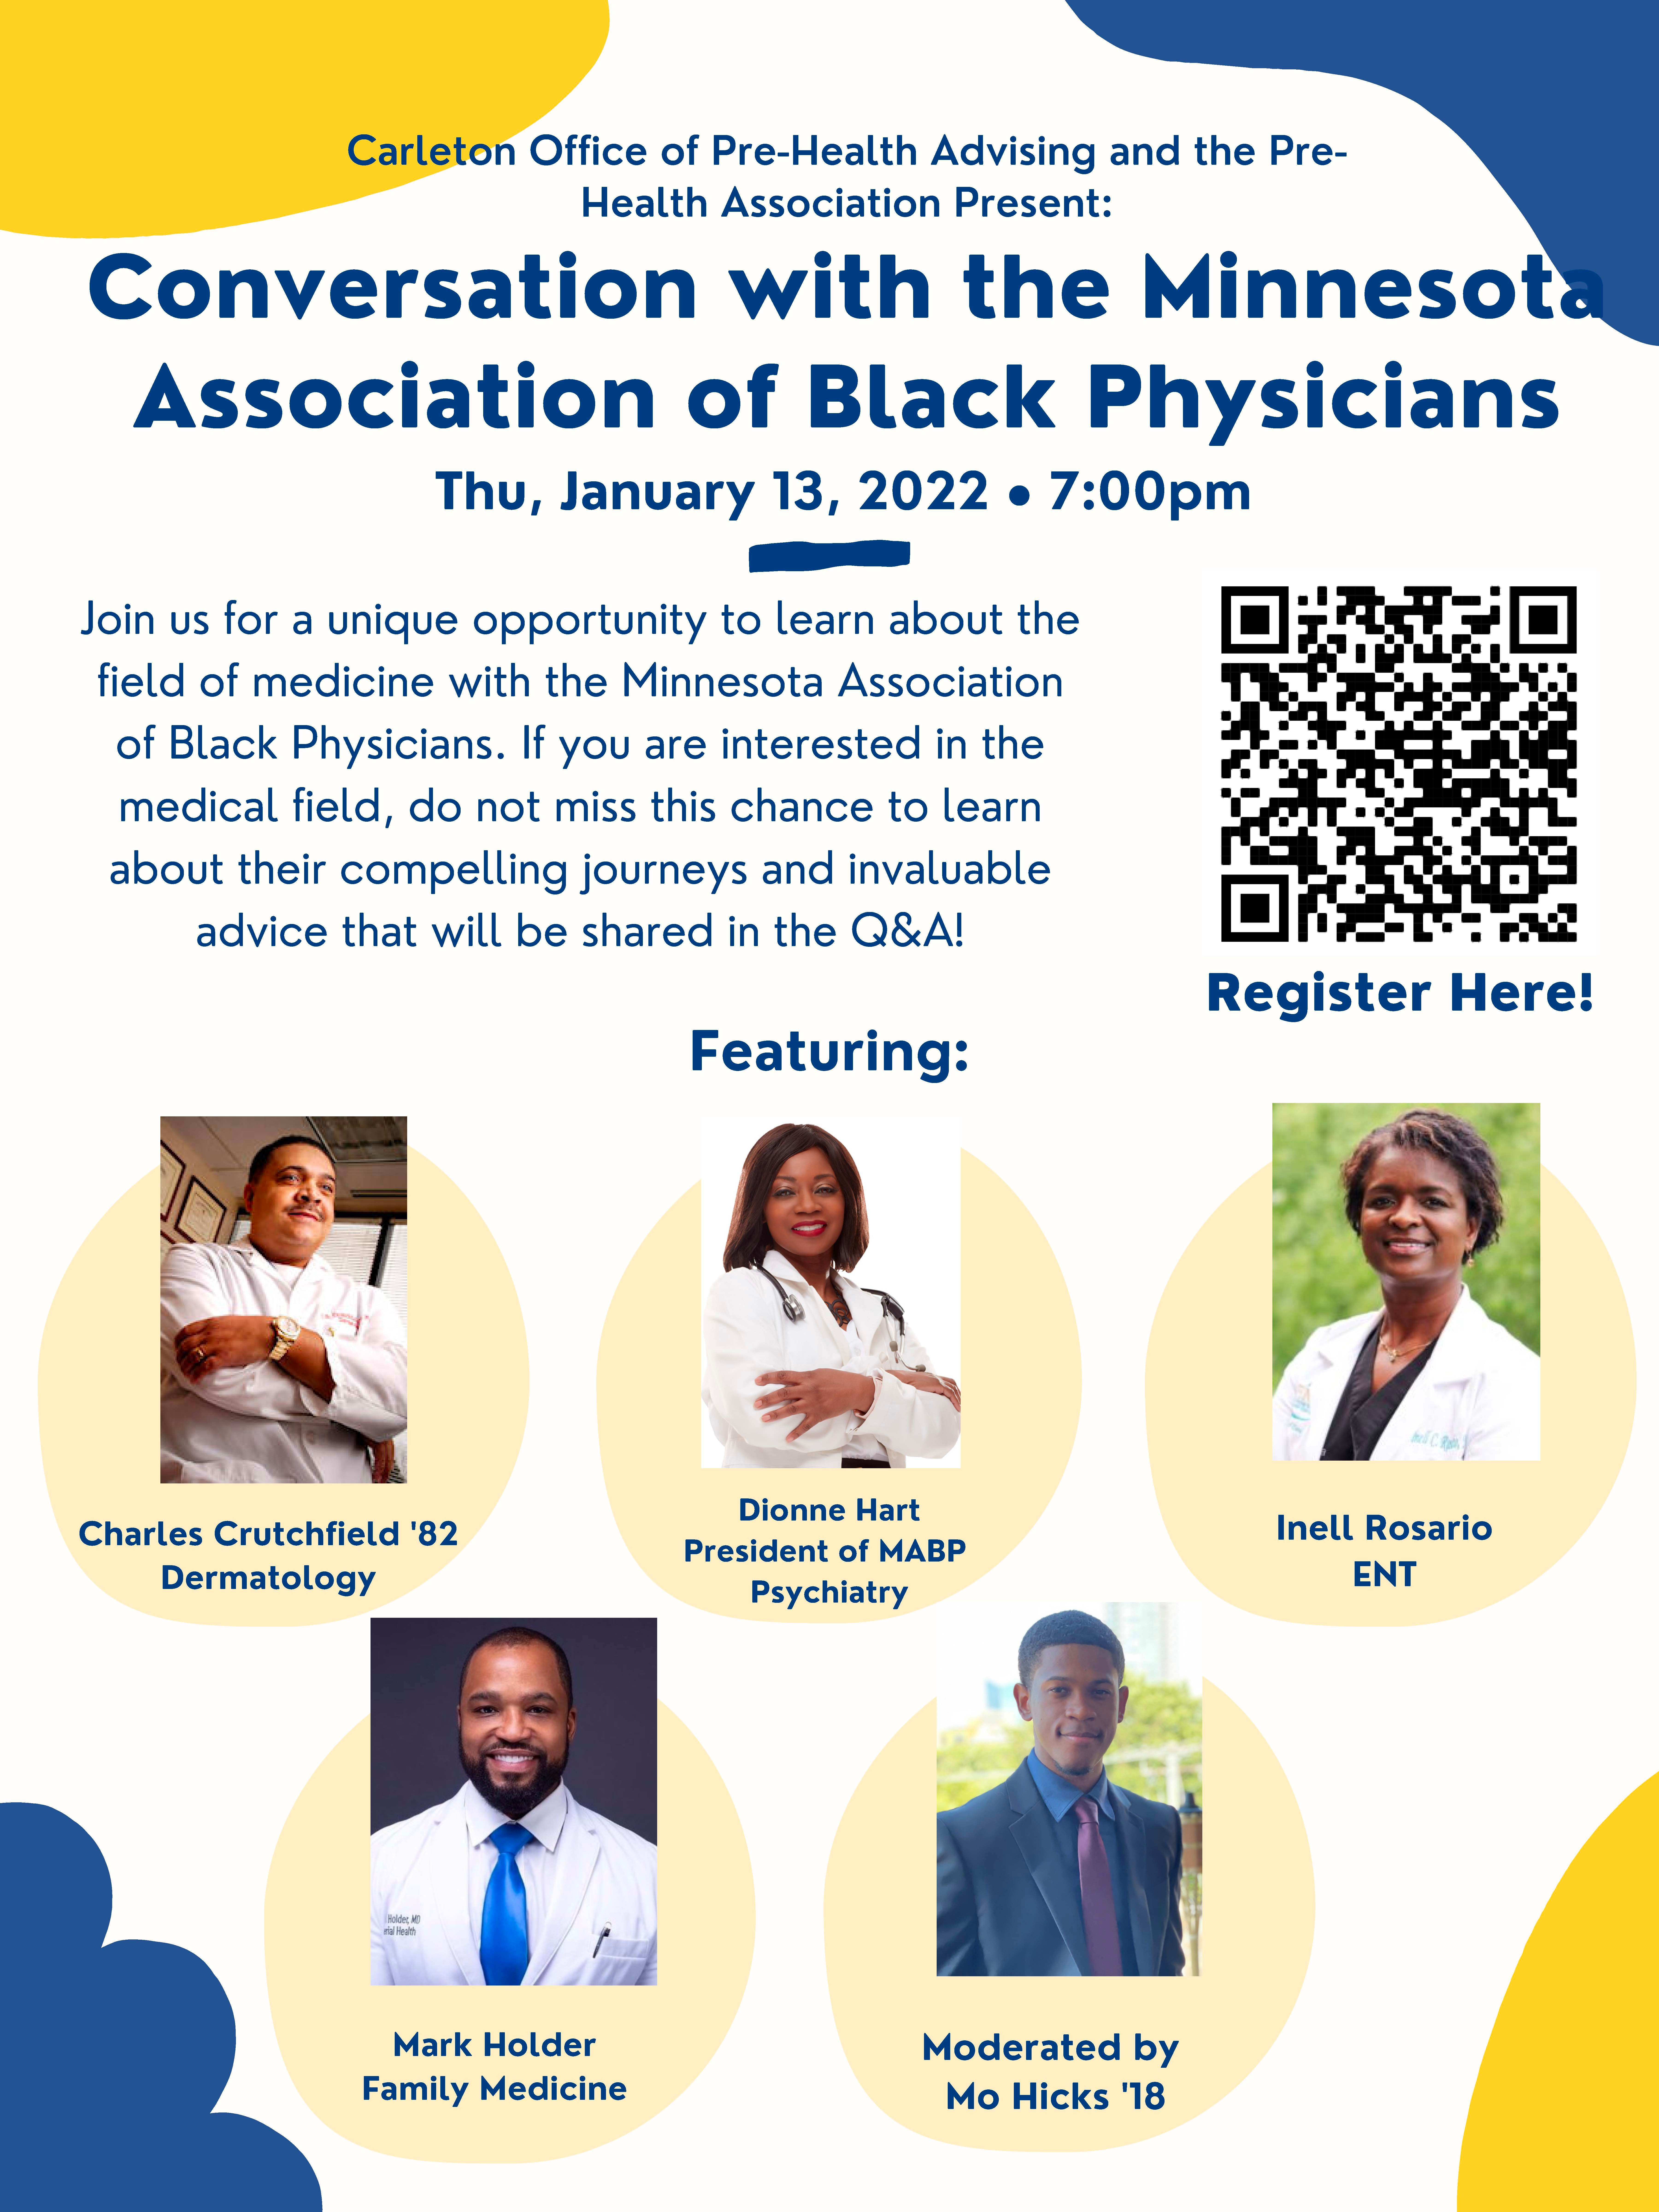 Conversation with the Minnesota Association of Black Physicians